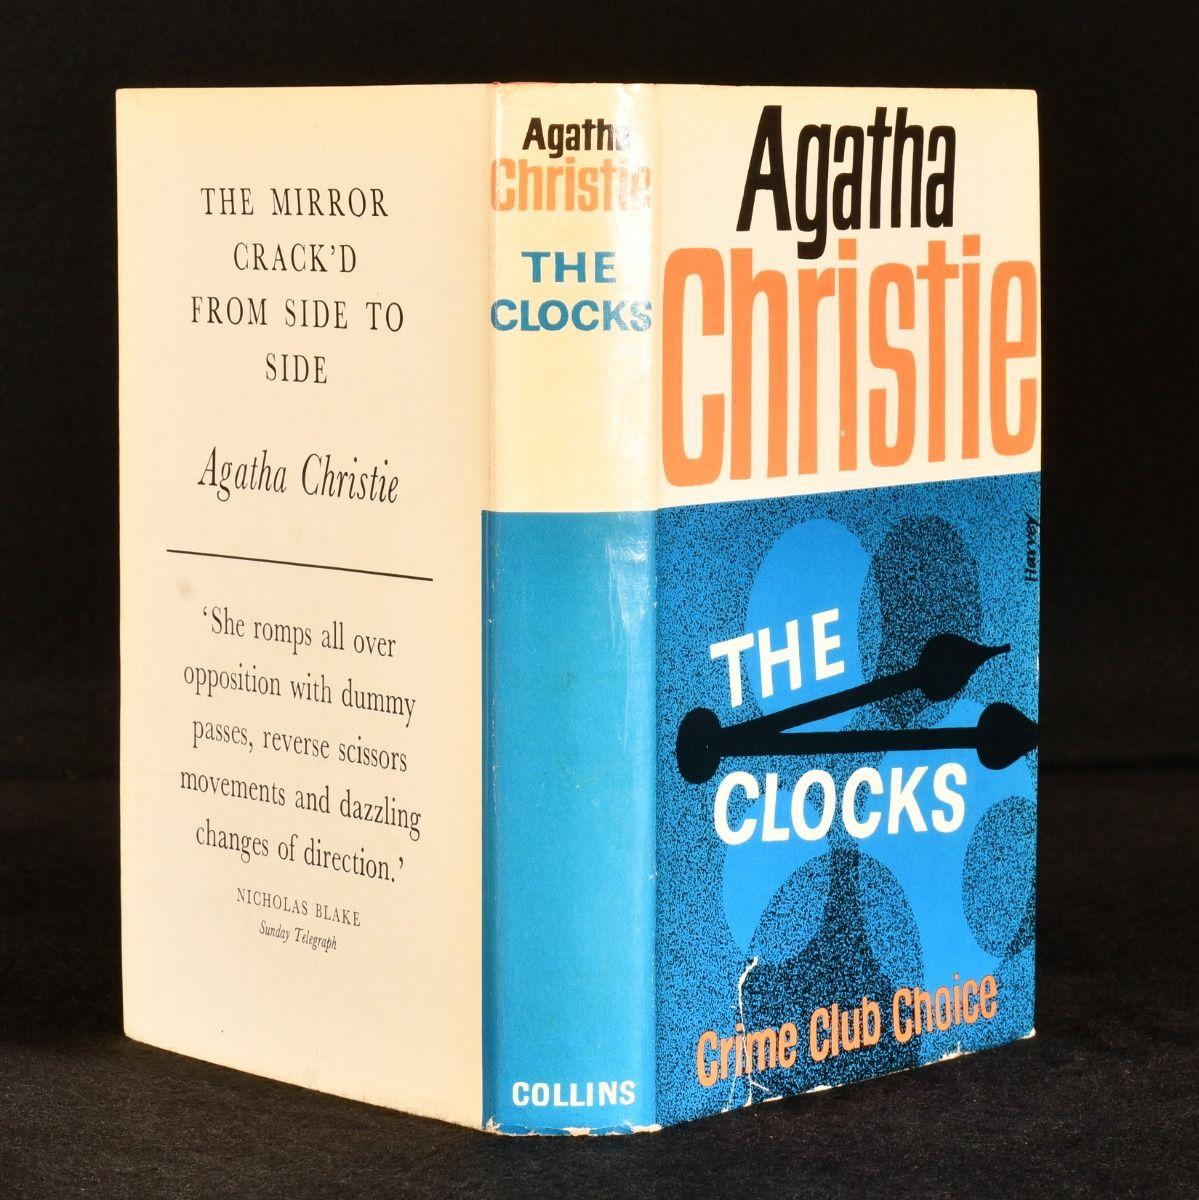 A vanishingly scarce signed first edition of this evocative travel memoir by Agatha Christie. Signed and dedicated to her secretary and friend, Carlo Fisher.

The first edition, first impression with no further impressions stated.

In the original